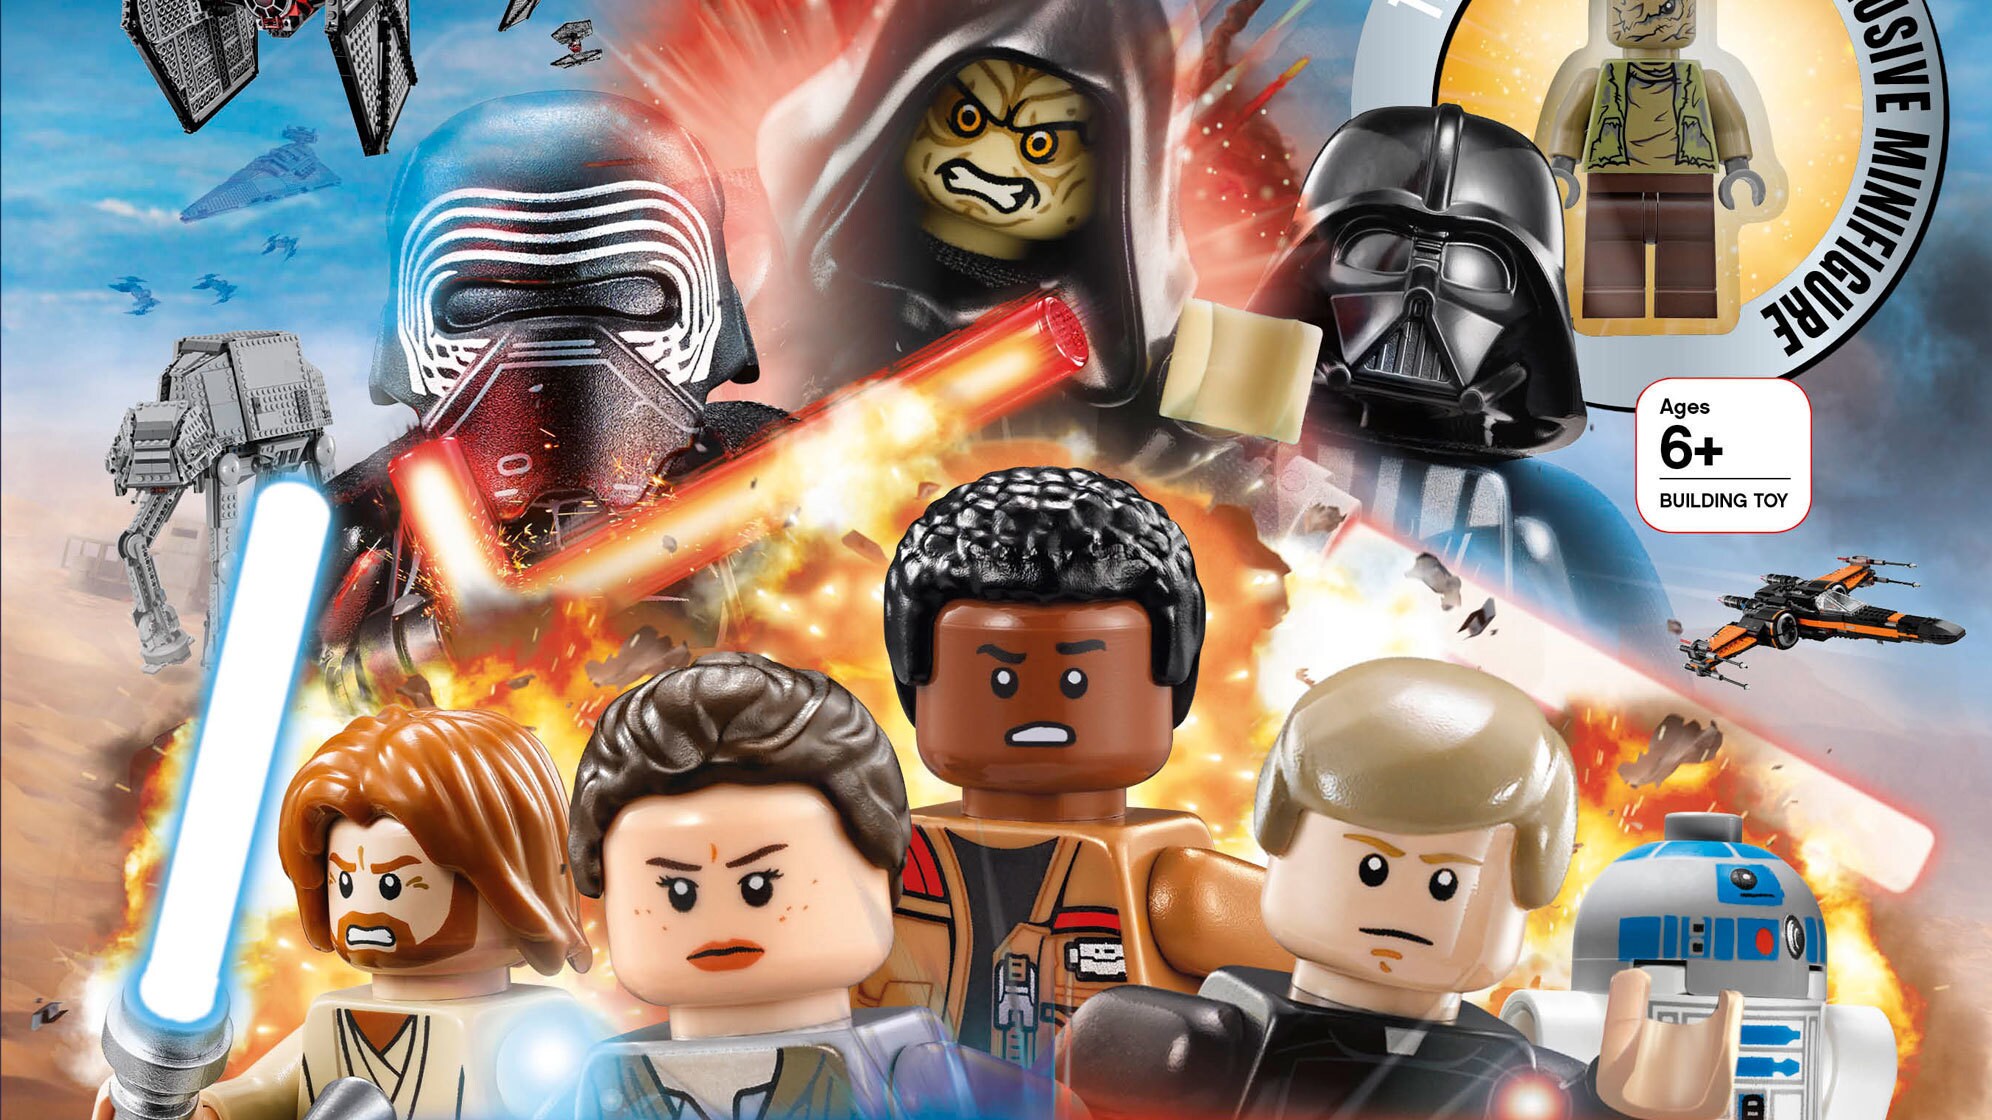 Explore a Bricktastic Galaxy in DK's LEGO Star Wars: Chronicles of the Force - Exclusive Reveal!